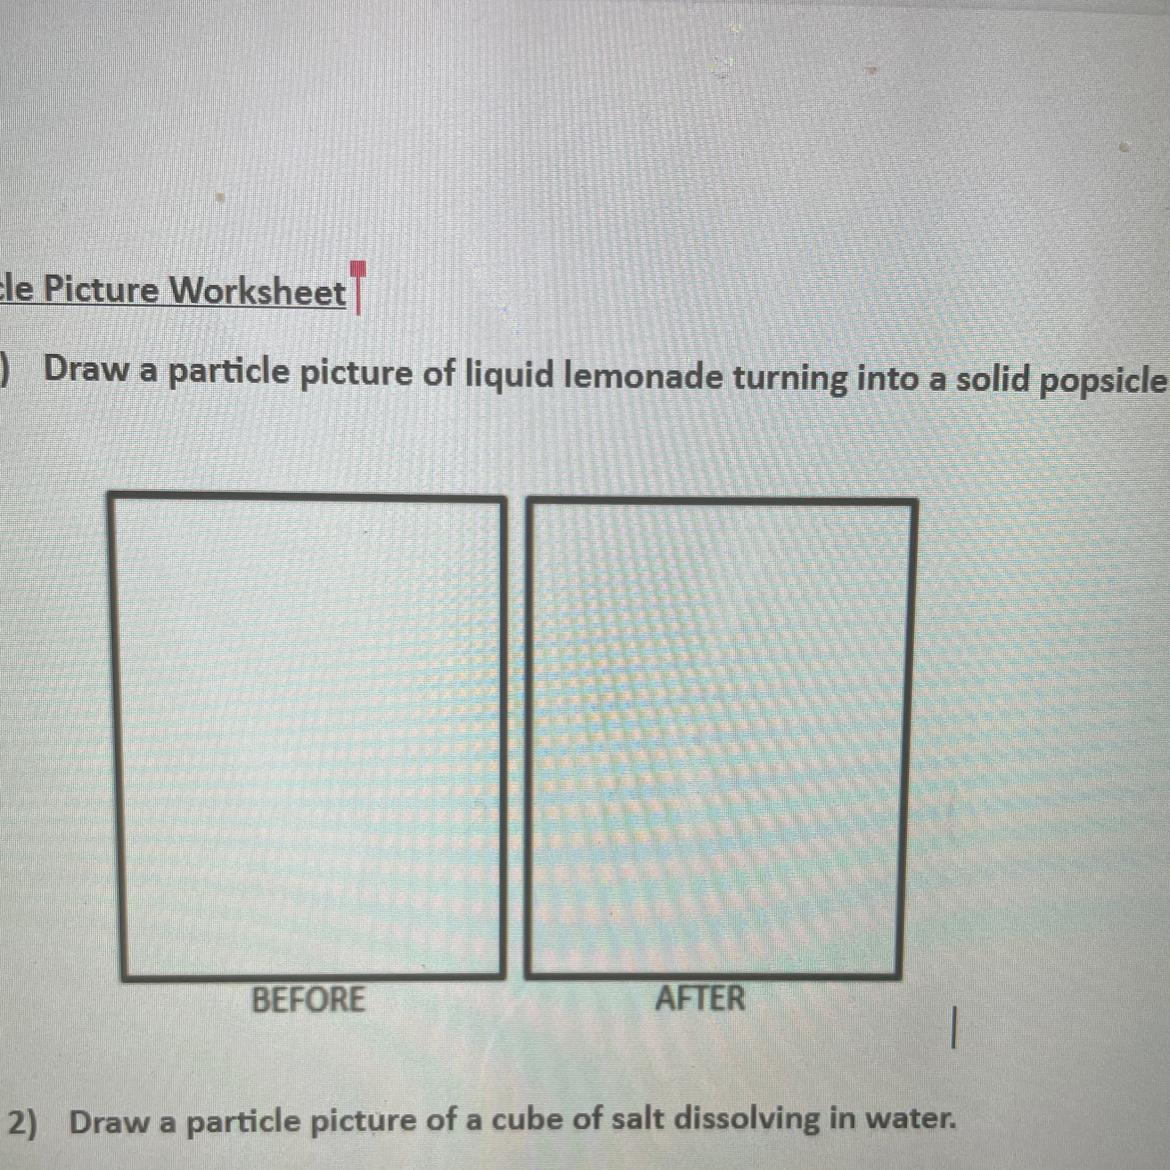 1) Draw A Particle Picture Of Liquid Lemonade Turning Into A Solid Popsicle BEFOREAFTER